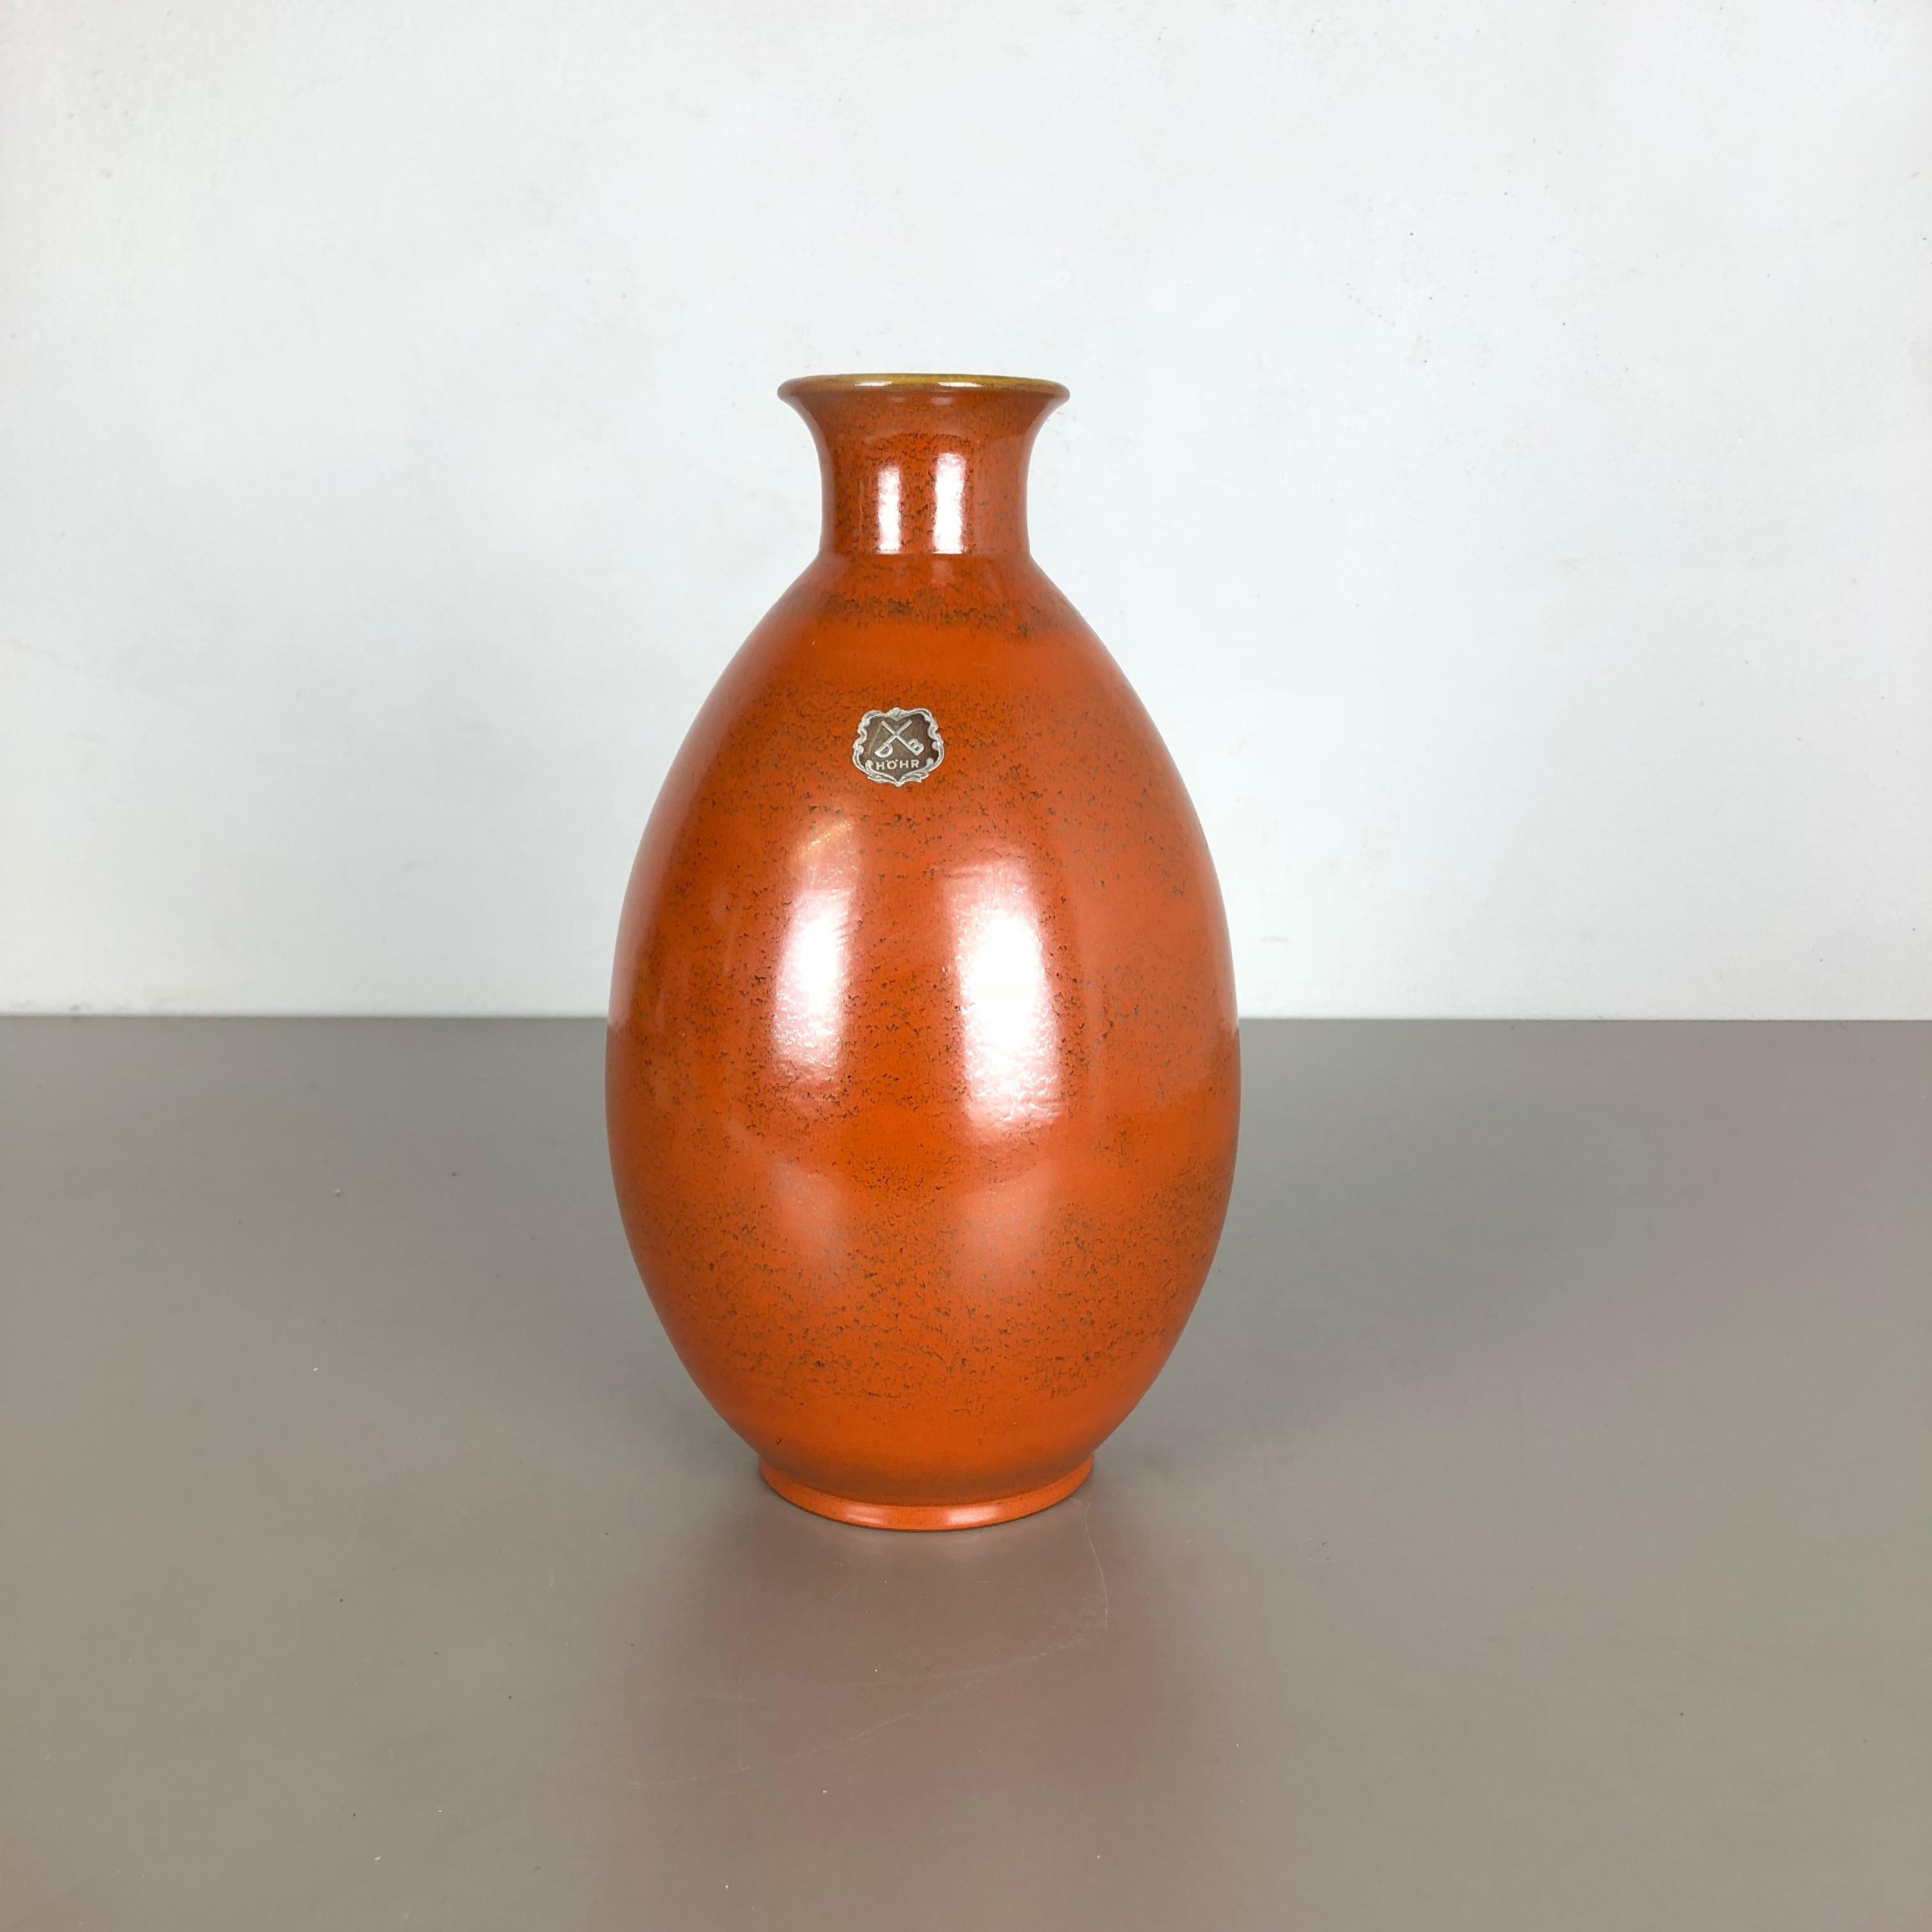 Article:

Pottery ceramic vase


Producer:

Dümmler and Breiden, Germany


Decade:

1950s





Original vintage 1950s pottery stoneware ceramic vase in Germany. High quality German production with a nice abstract red coloration.